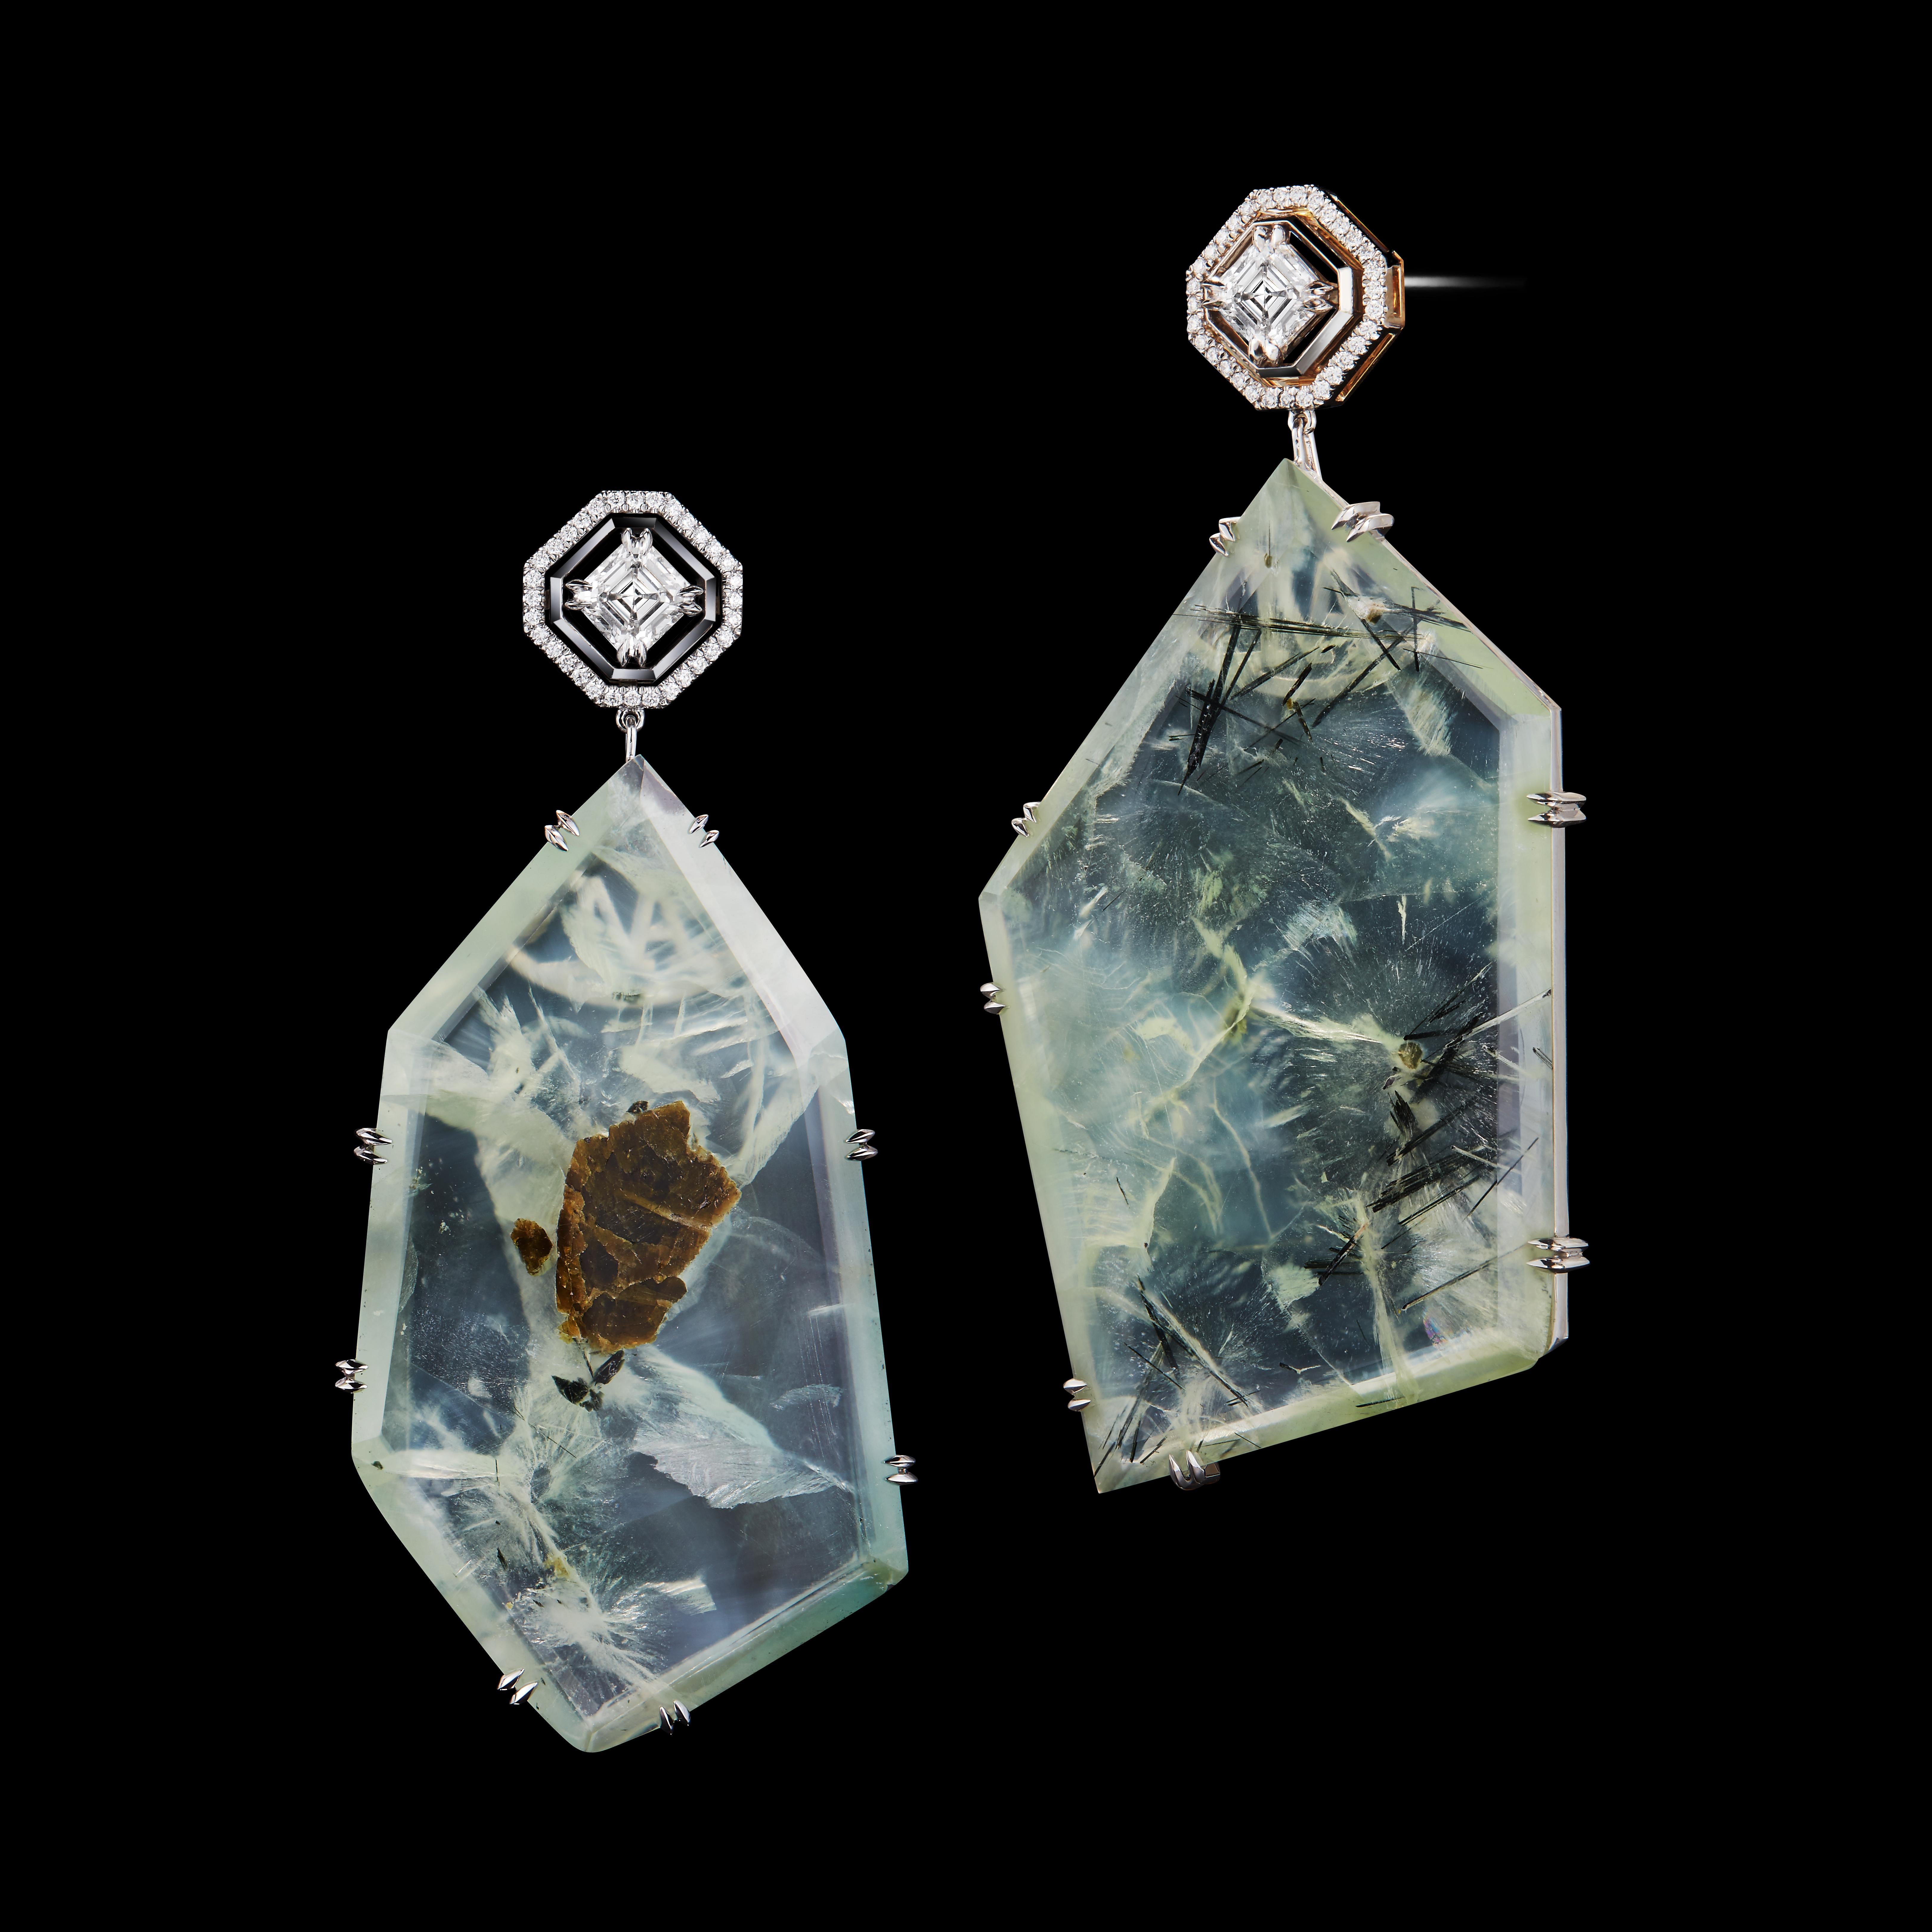 A pair of one-of-a-kind Alexandra Mor earrings featuring Asscher-cut Diamonds and Prehnite Precious Stones. Earrings are complemented by Alexandra Mor signature floating Diamond melee weighing 0.32 carats, and knife-edged wire detail. Asscher-cut